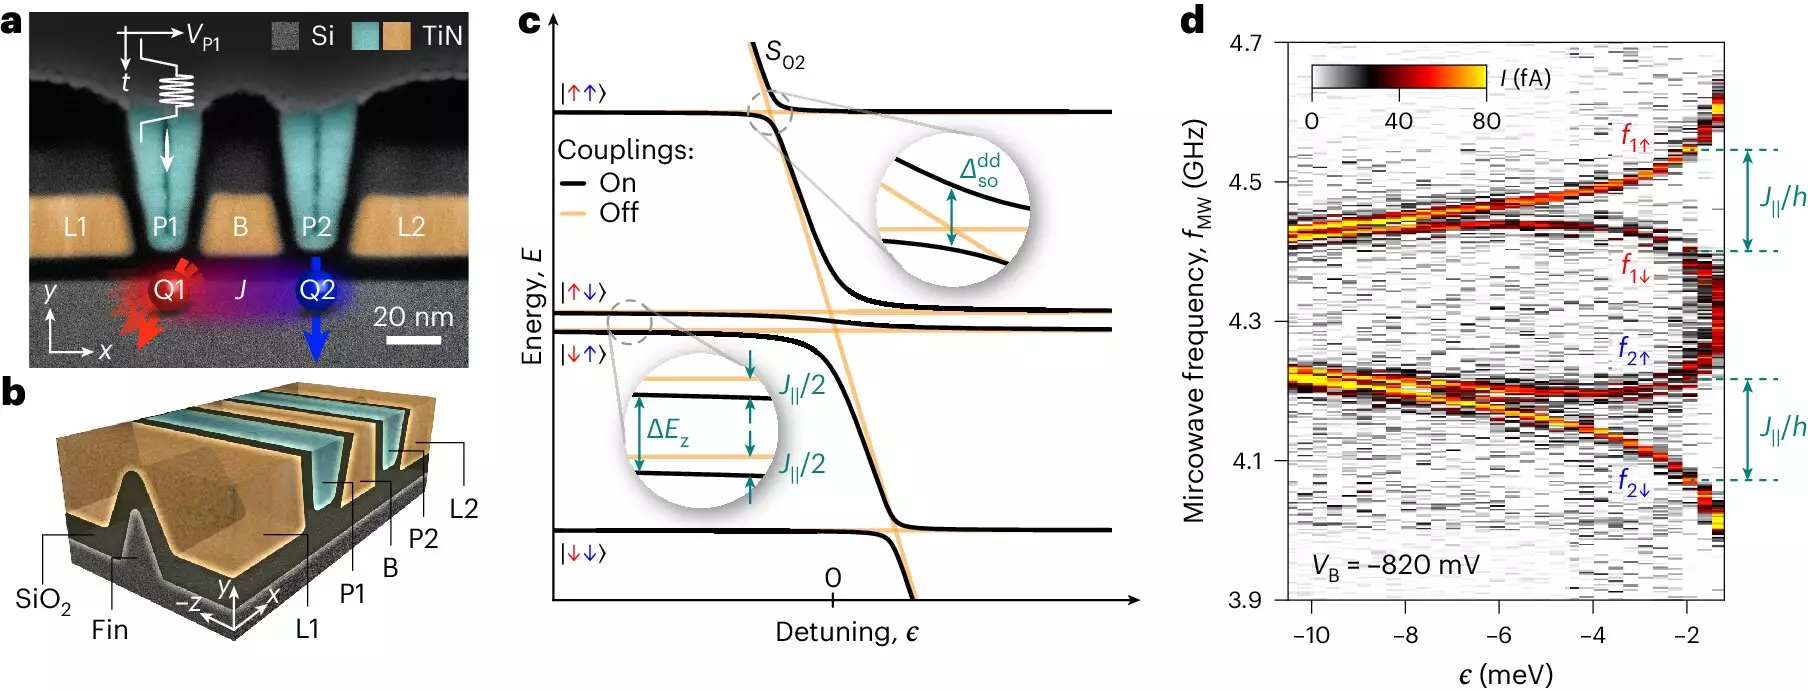 The Future of Quantum Computing: Controllable Interaction of Hole Spin Qubits